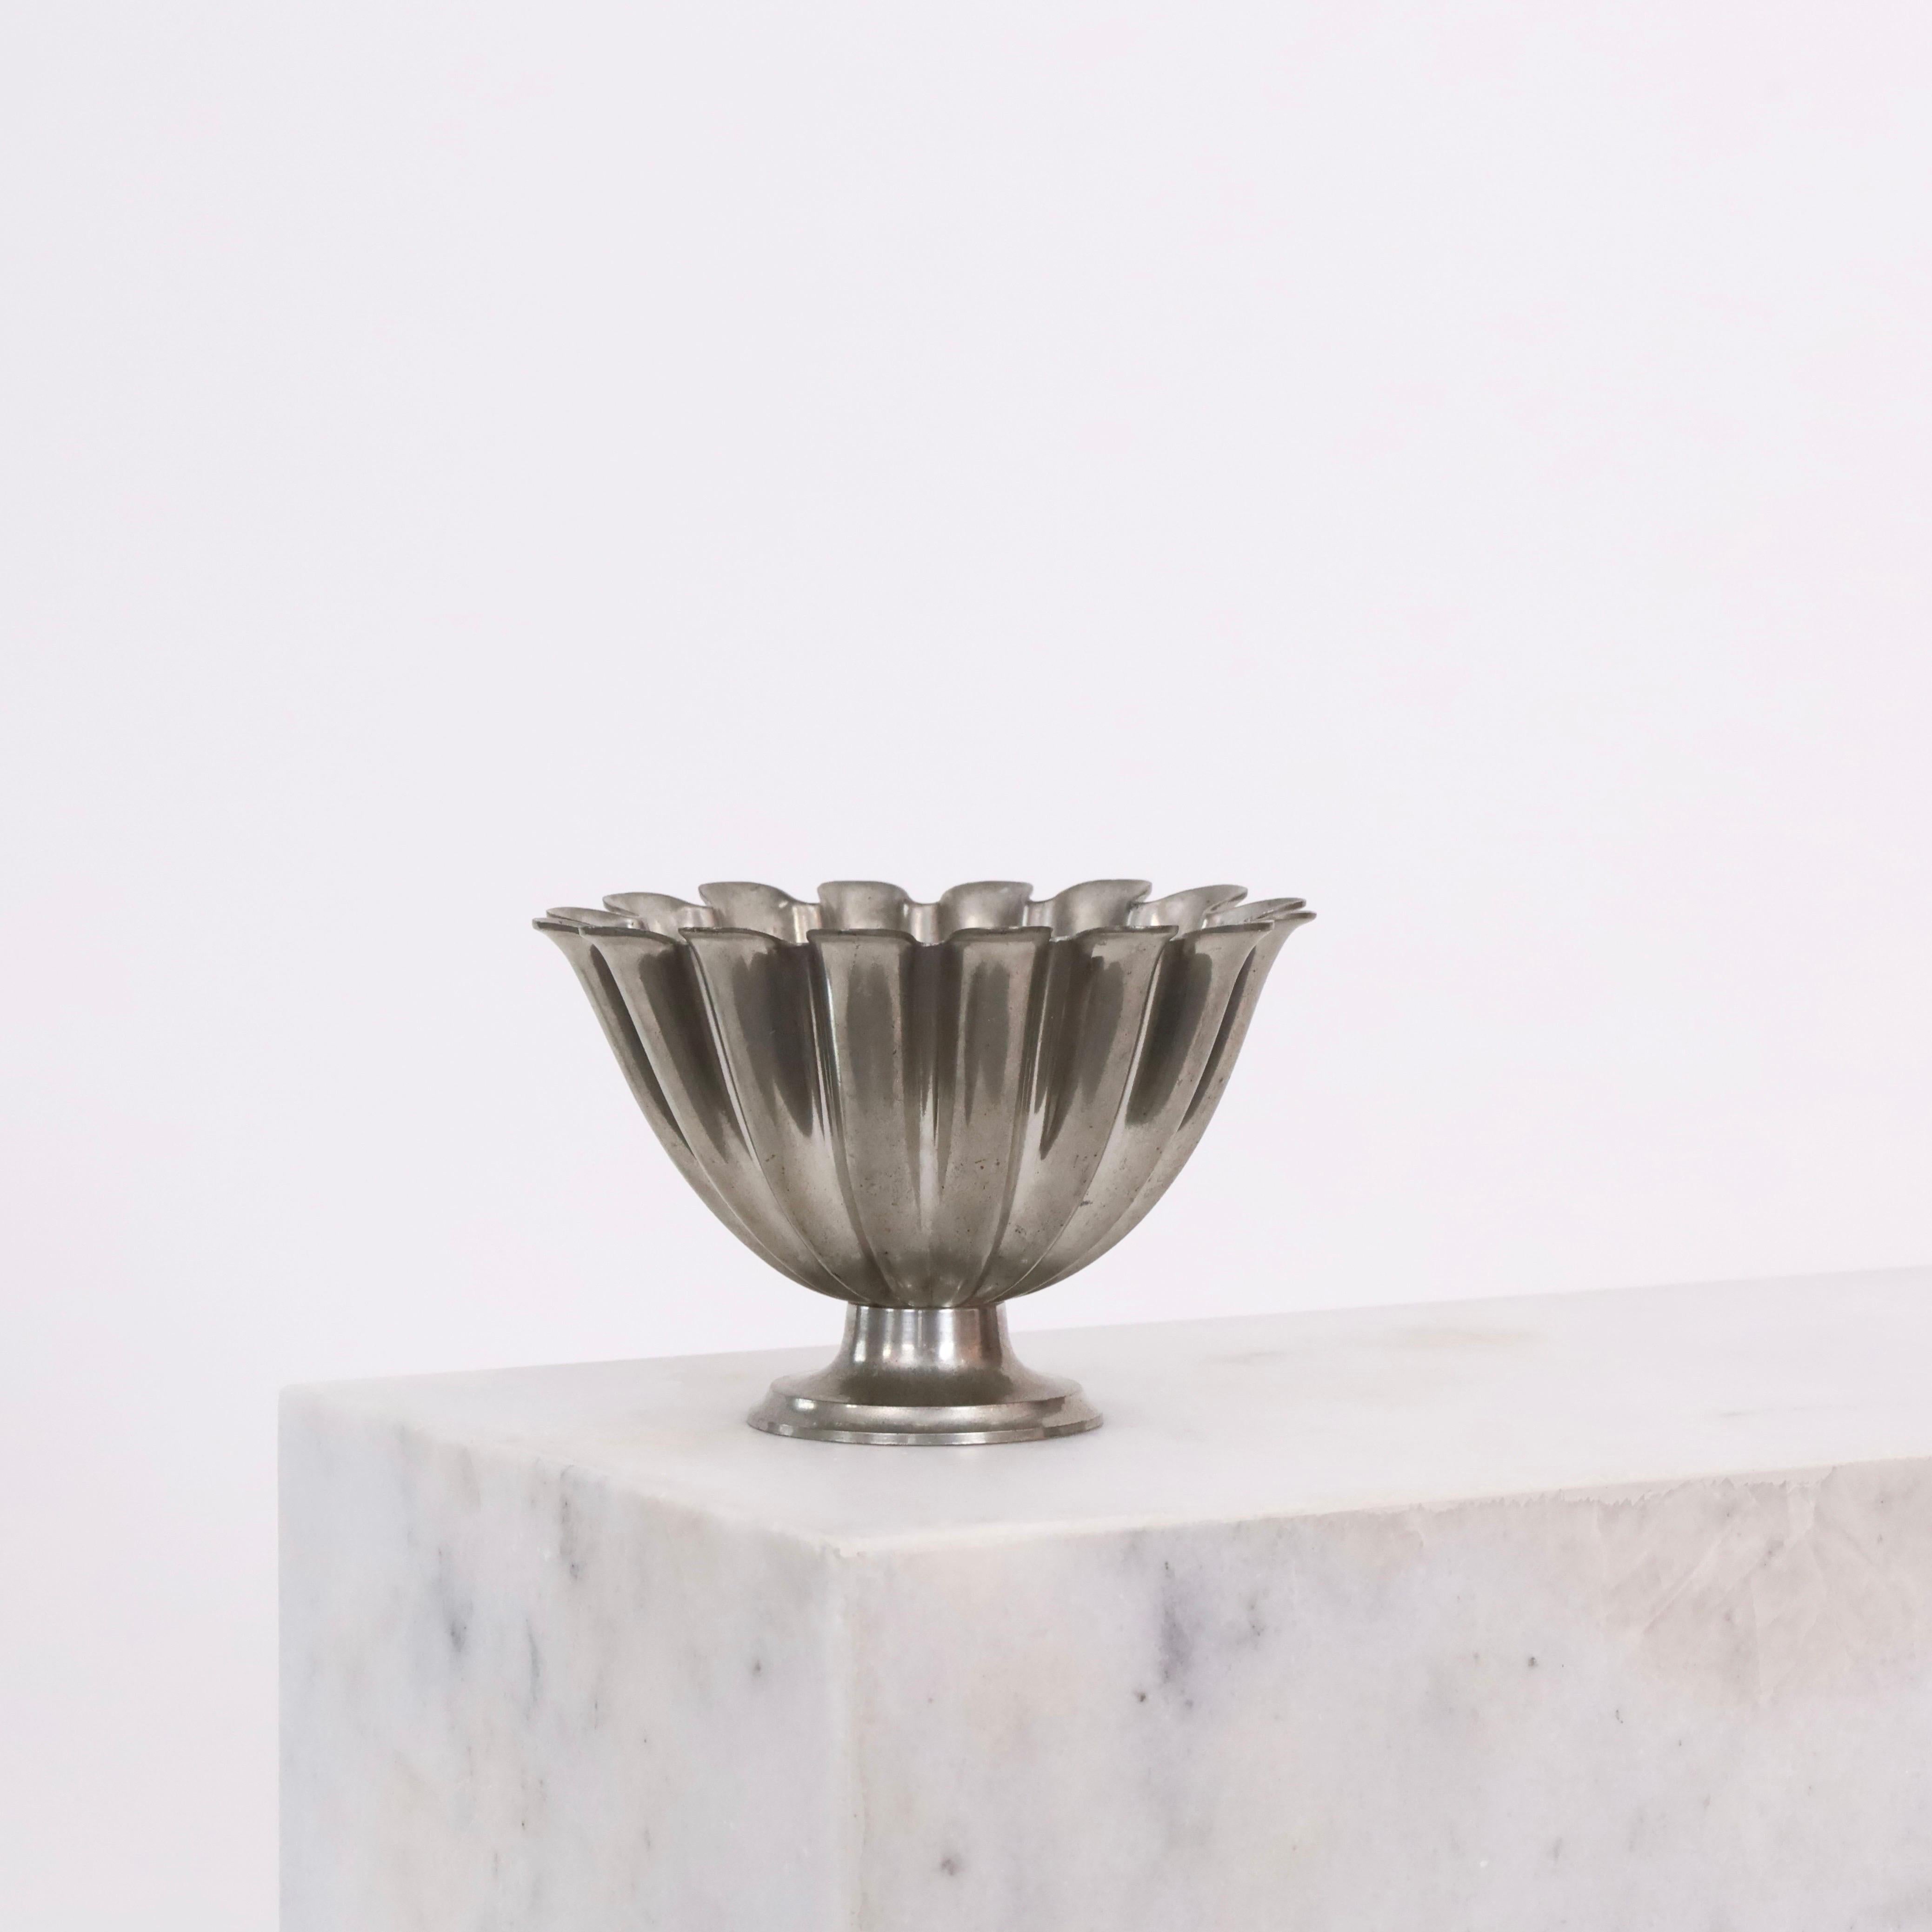 Scalloped pedestal pewter bowl by Just Andersen 1920s, Denmark In Fair Condition For Sale In Værløse, DK